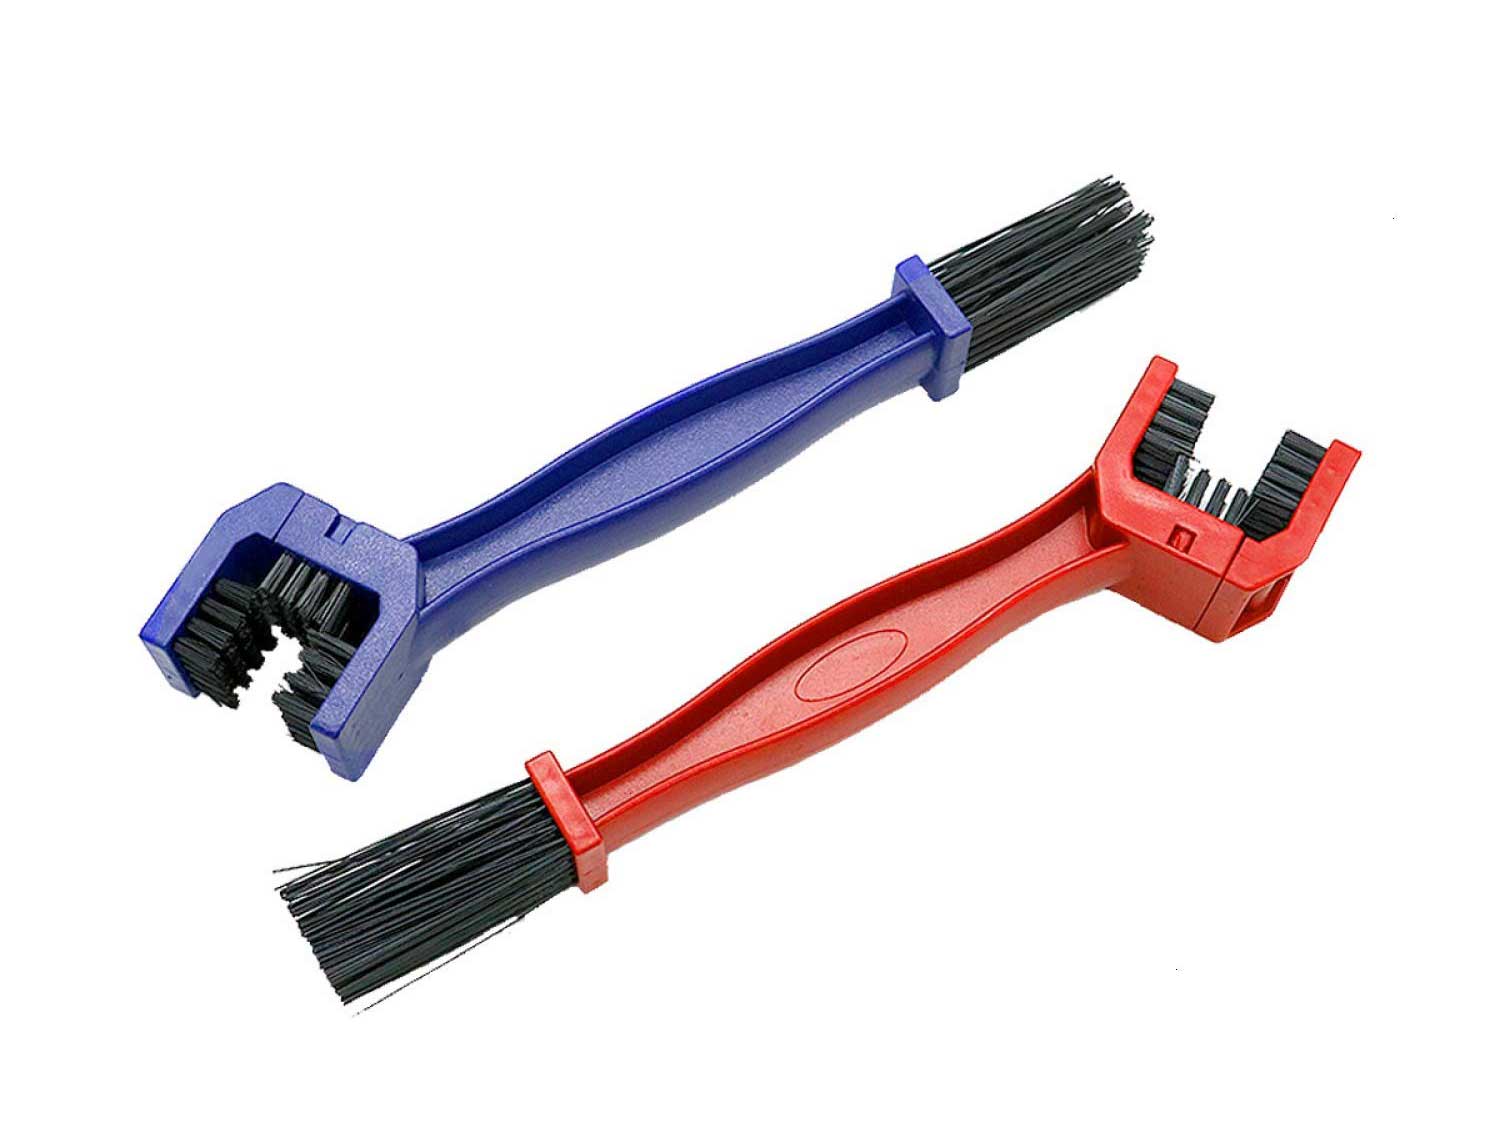 Wefoo 2-Piece Motorcycle Chain Cleaning Brush